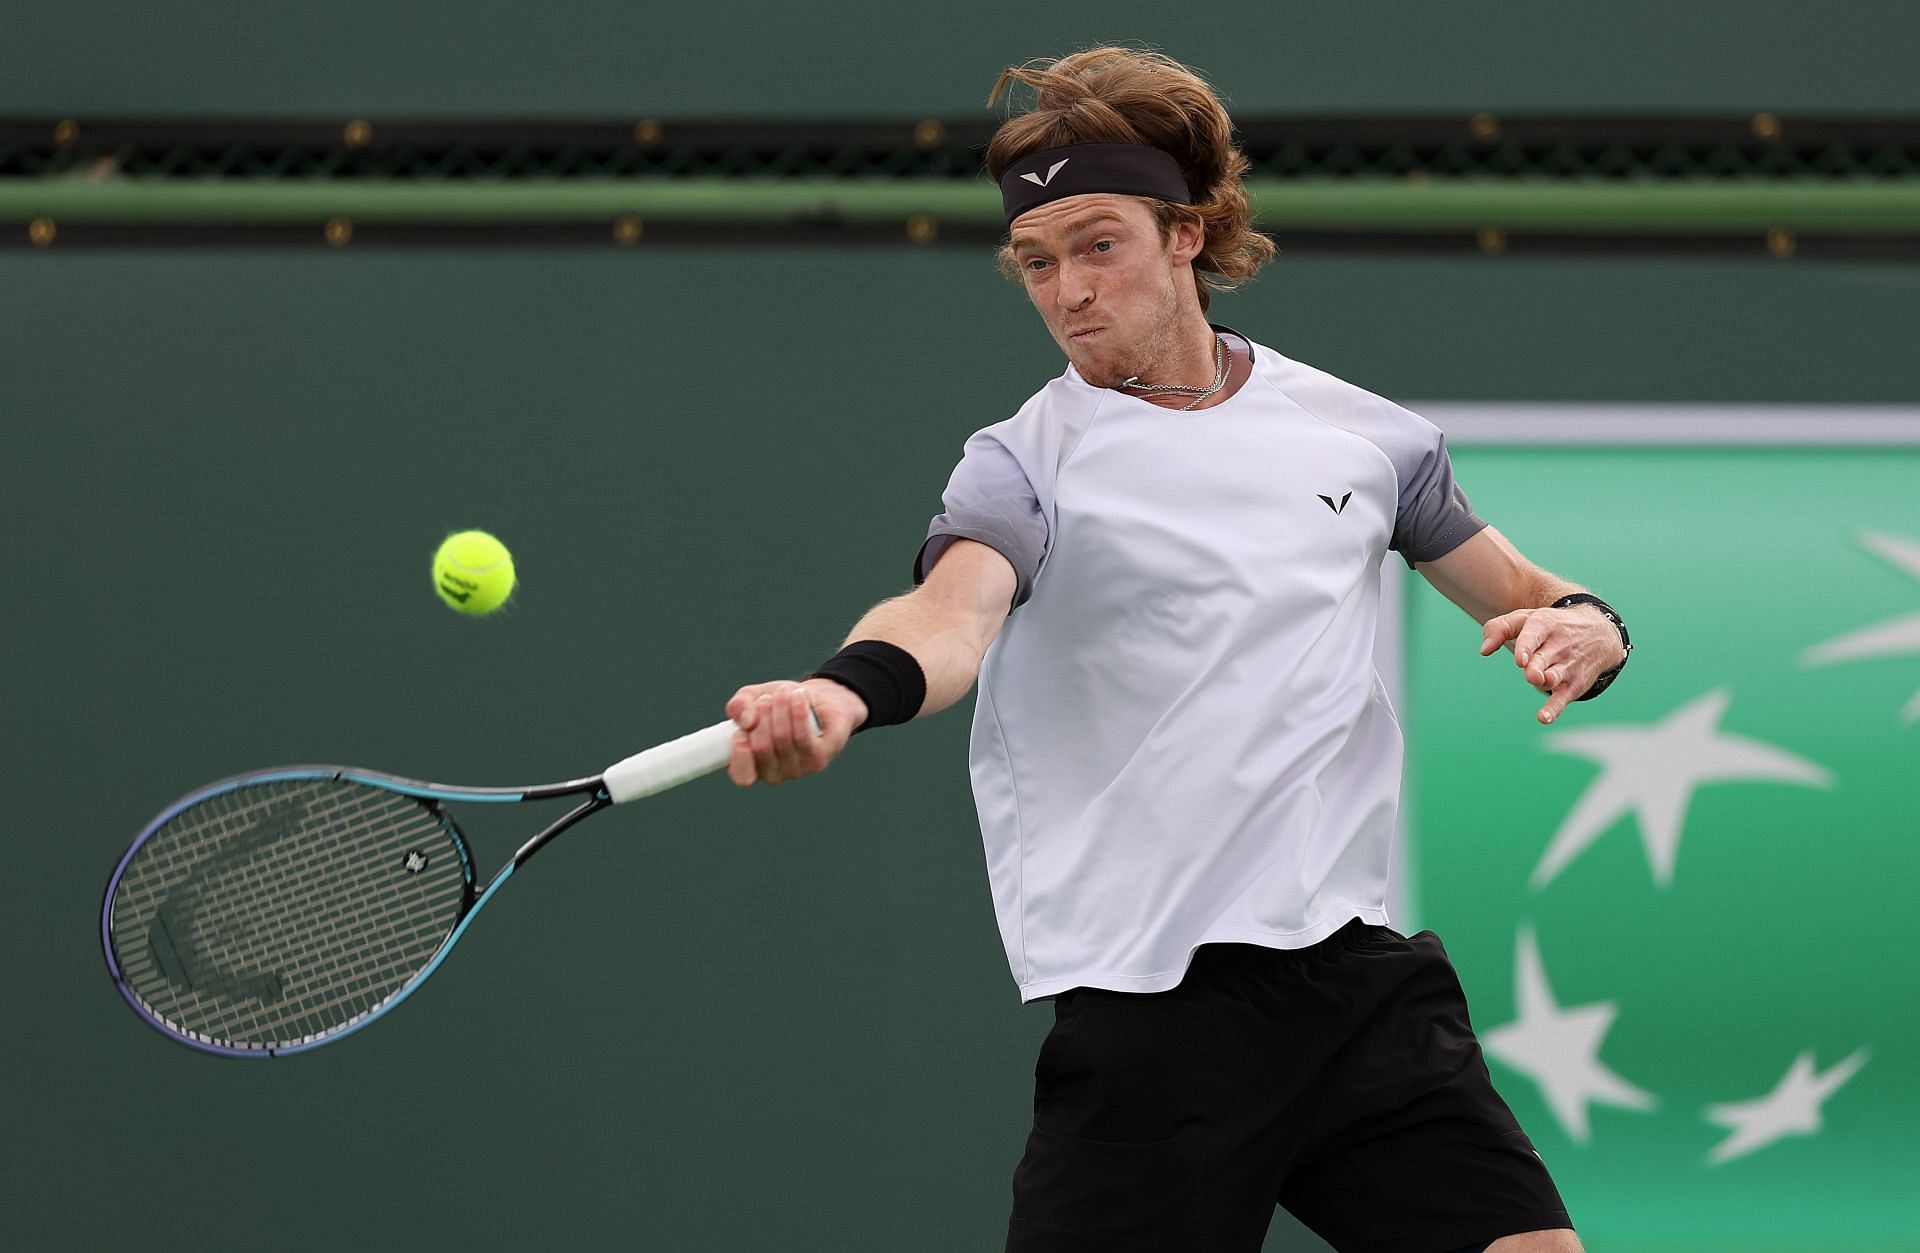 Rublev at the BNP Paribas Open